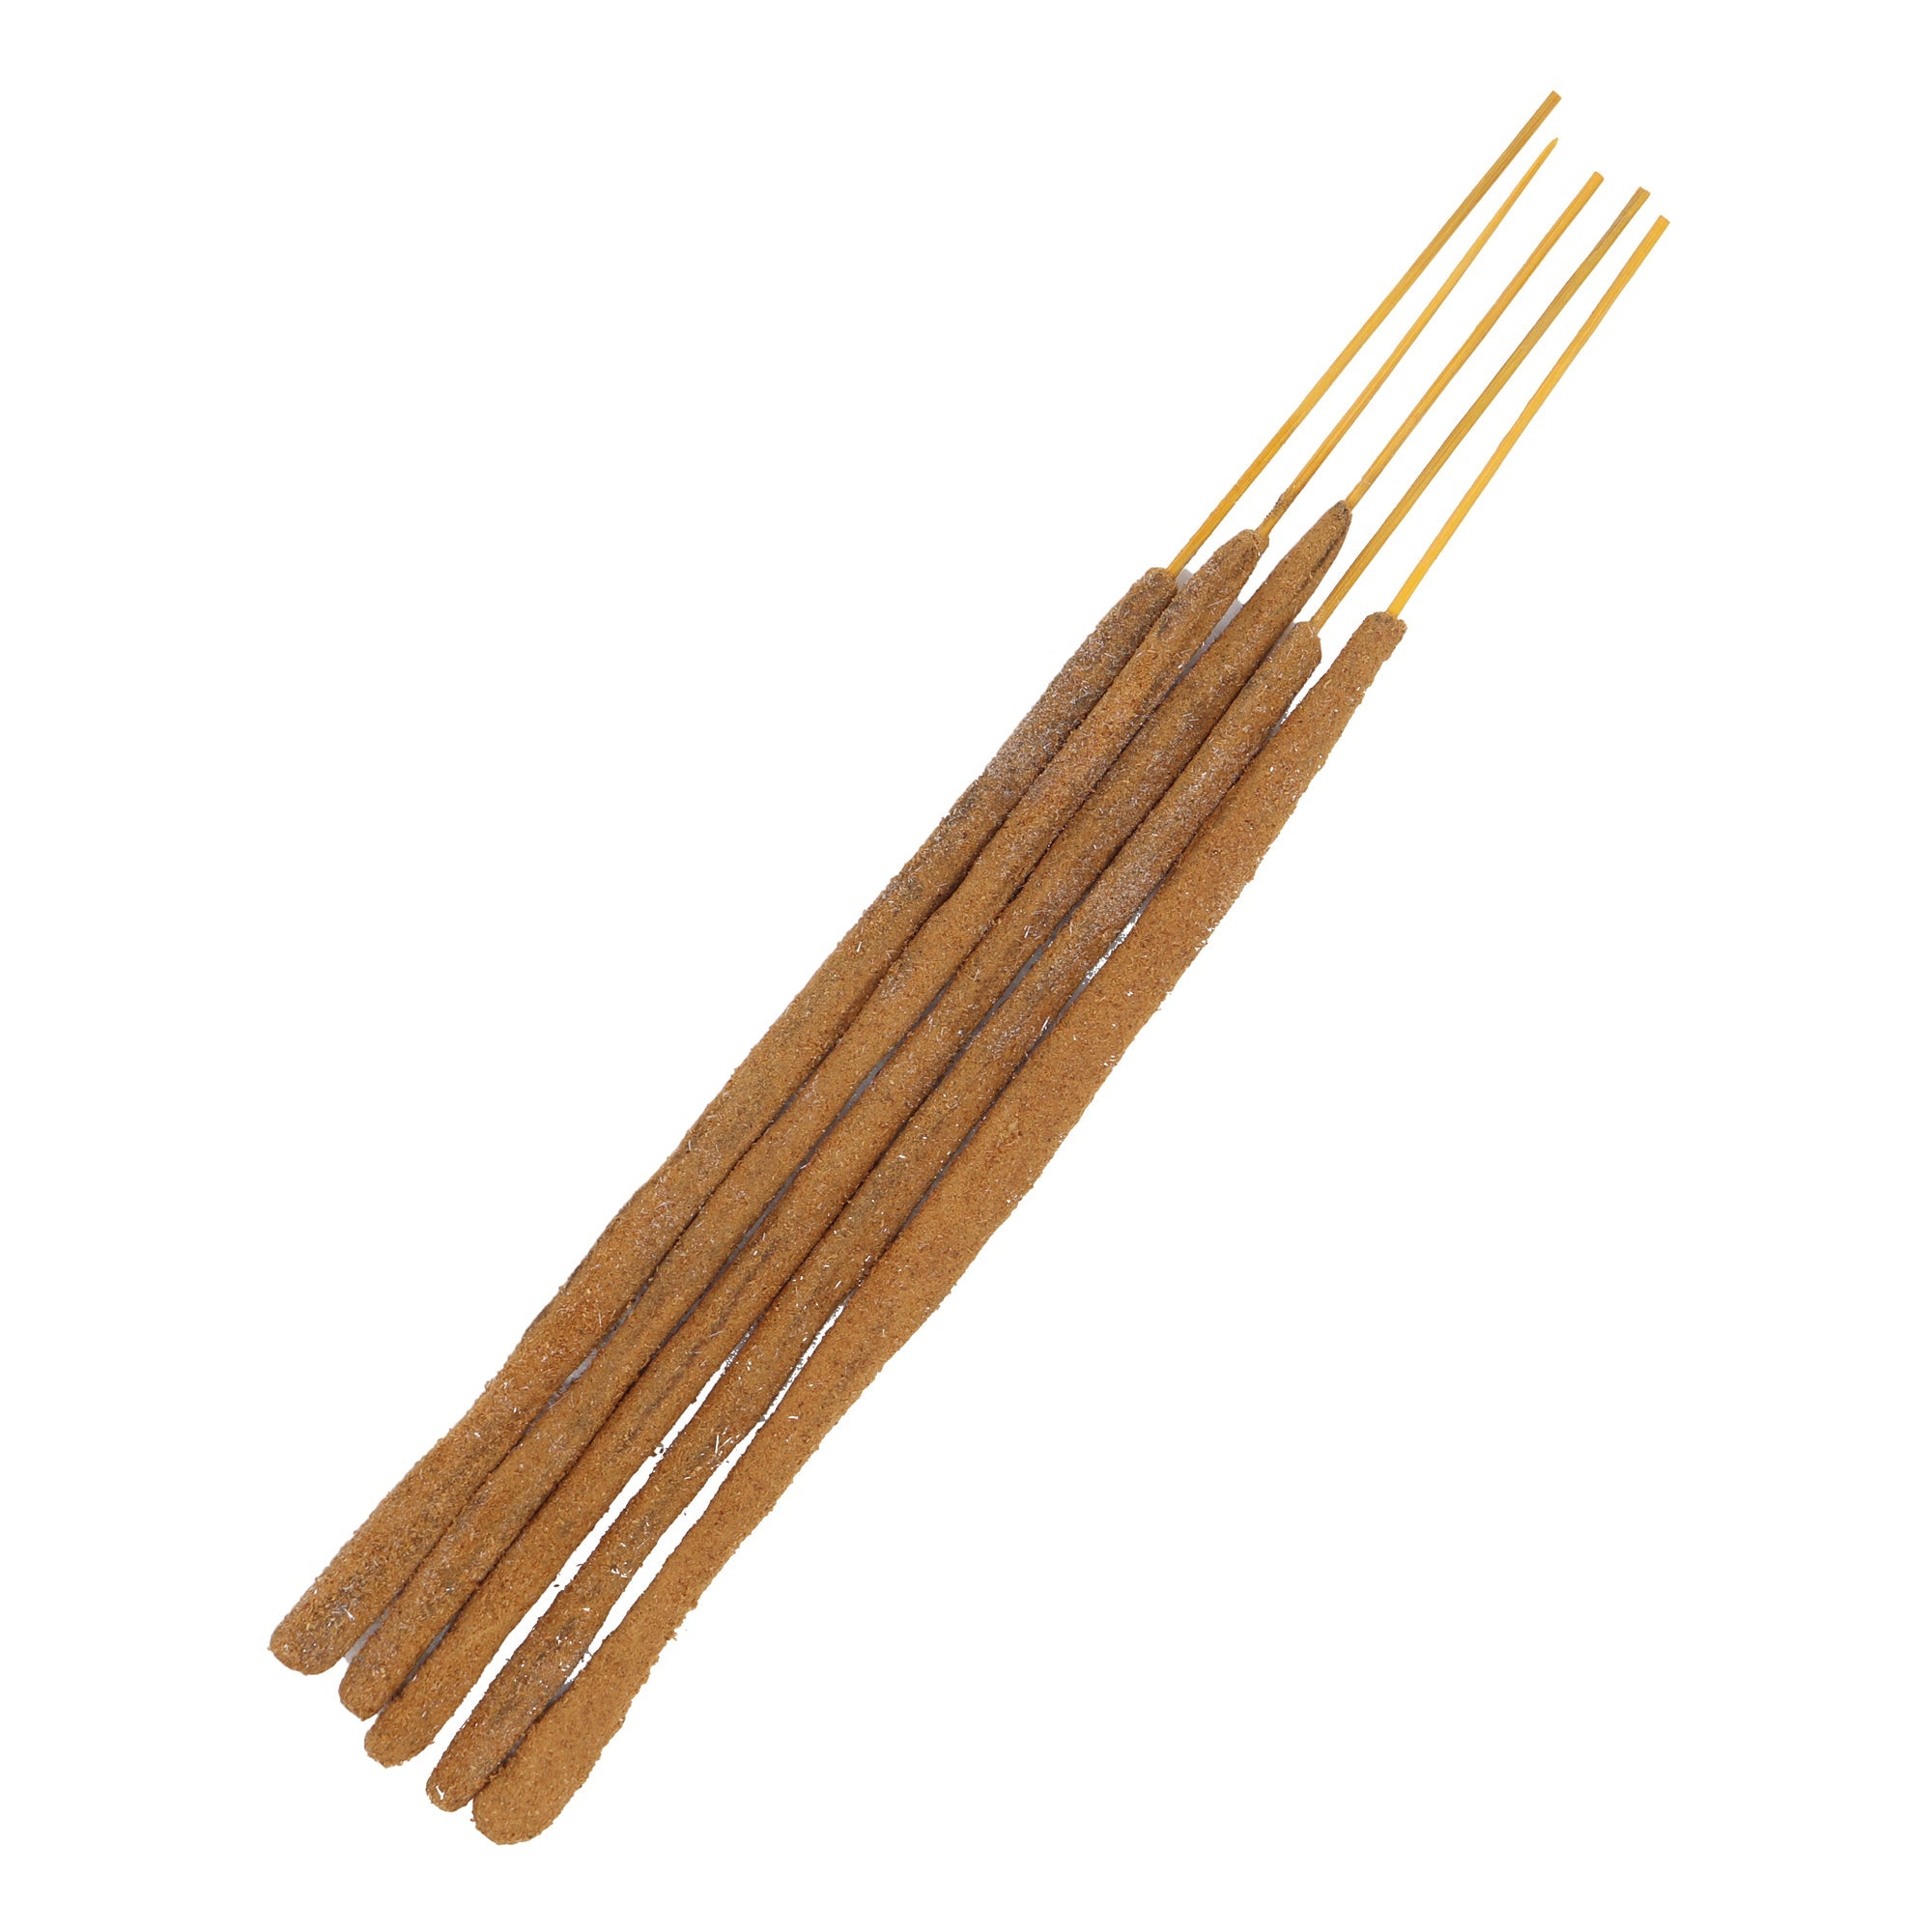 Golden Champa Incense - 13 Moons